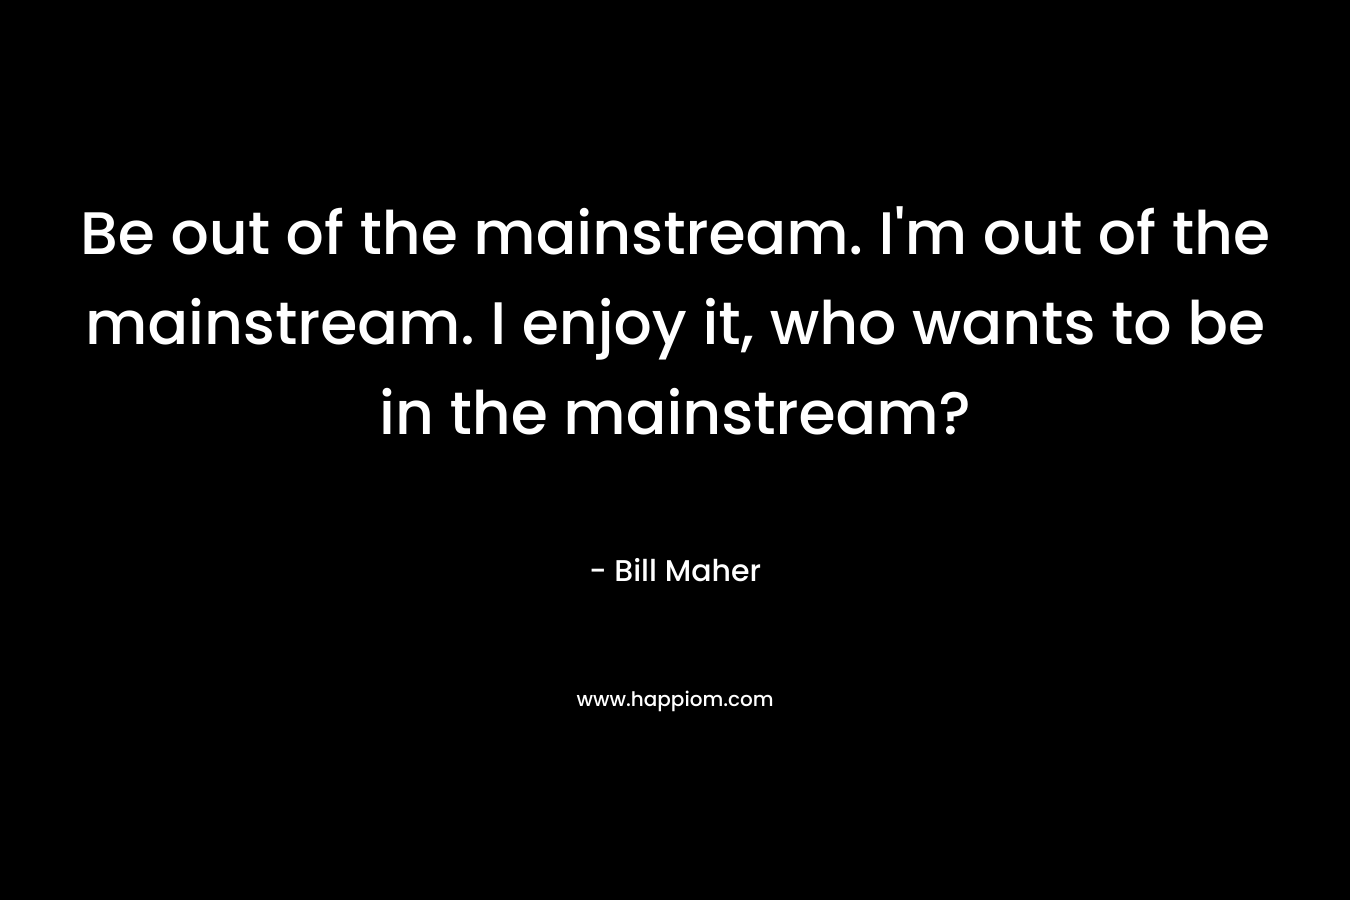 Be out of the mainstream. I’m out of the mainstream. I enjoy it, who wants to be in the mainstream? – Bill Maher